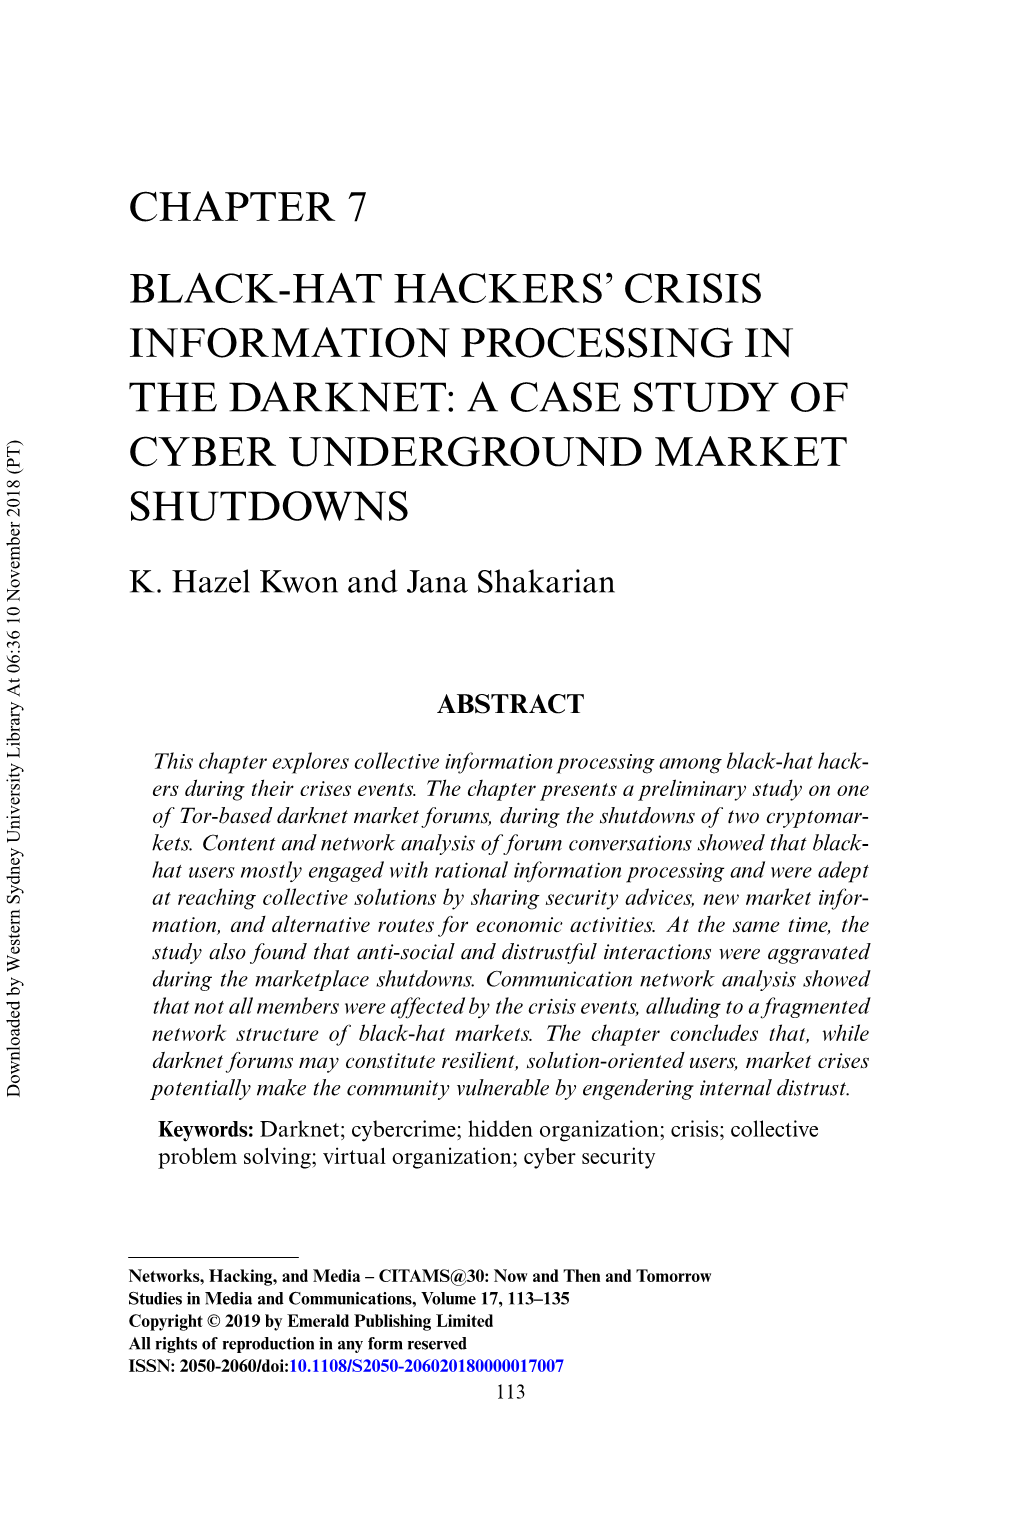 Chapter 7: Black-Hat Hackers' Crisis Information Processing in the Darknet: a Case Study of Cyber Underground Market Shutdow